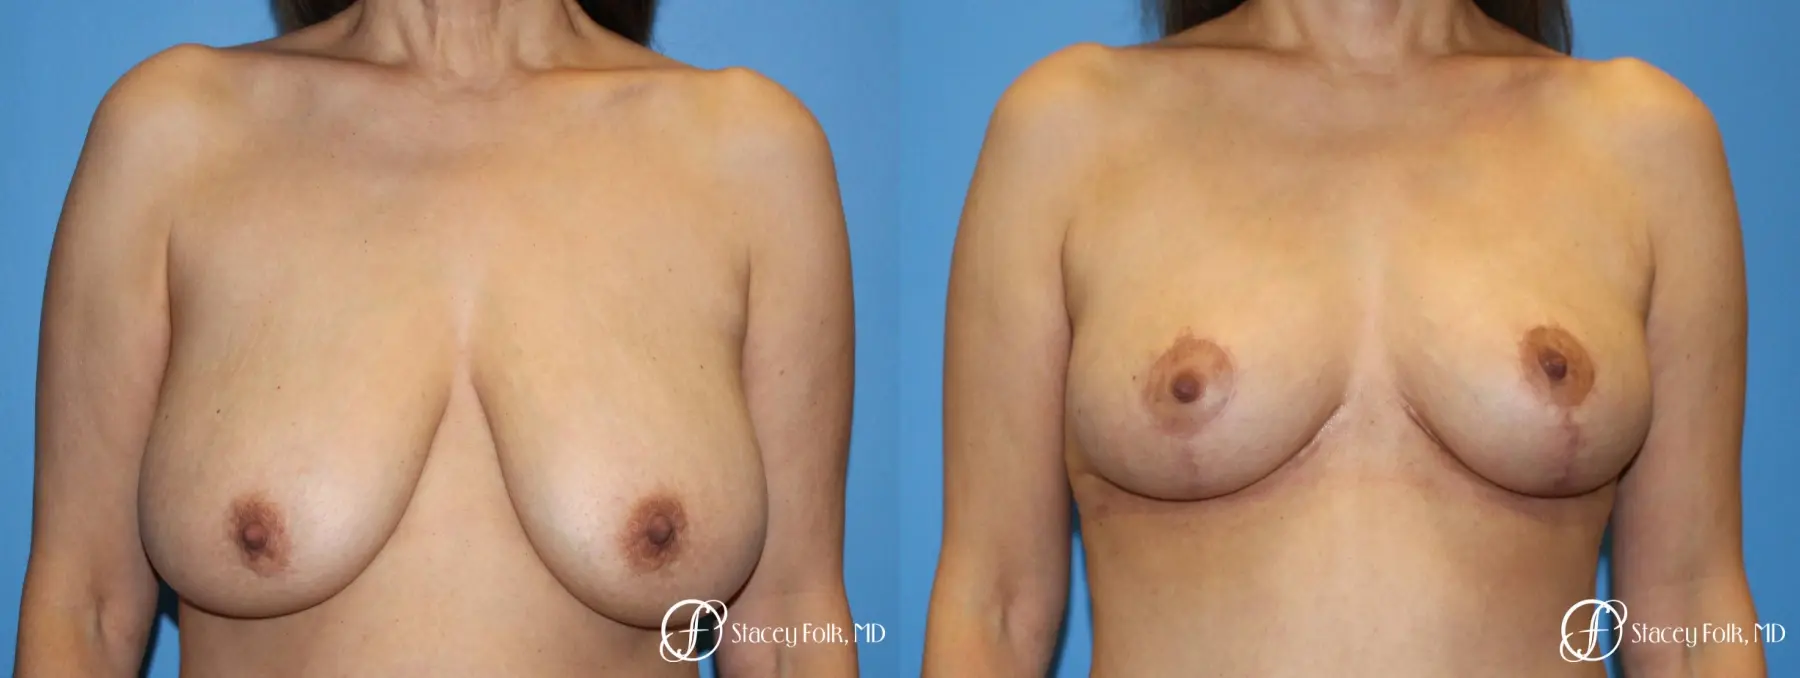 Denver Breast Lift - Mastopexy 7984 - Before and After